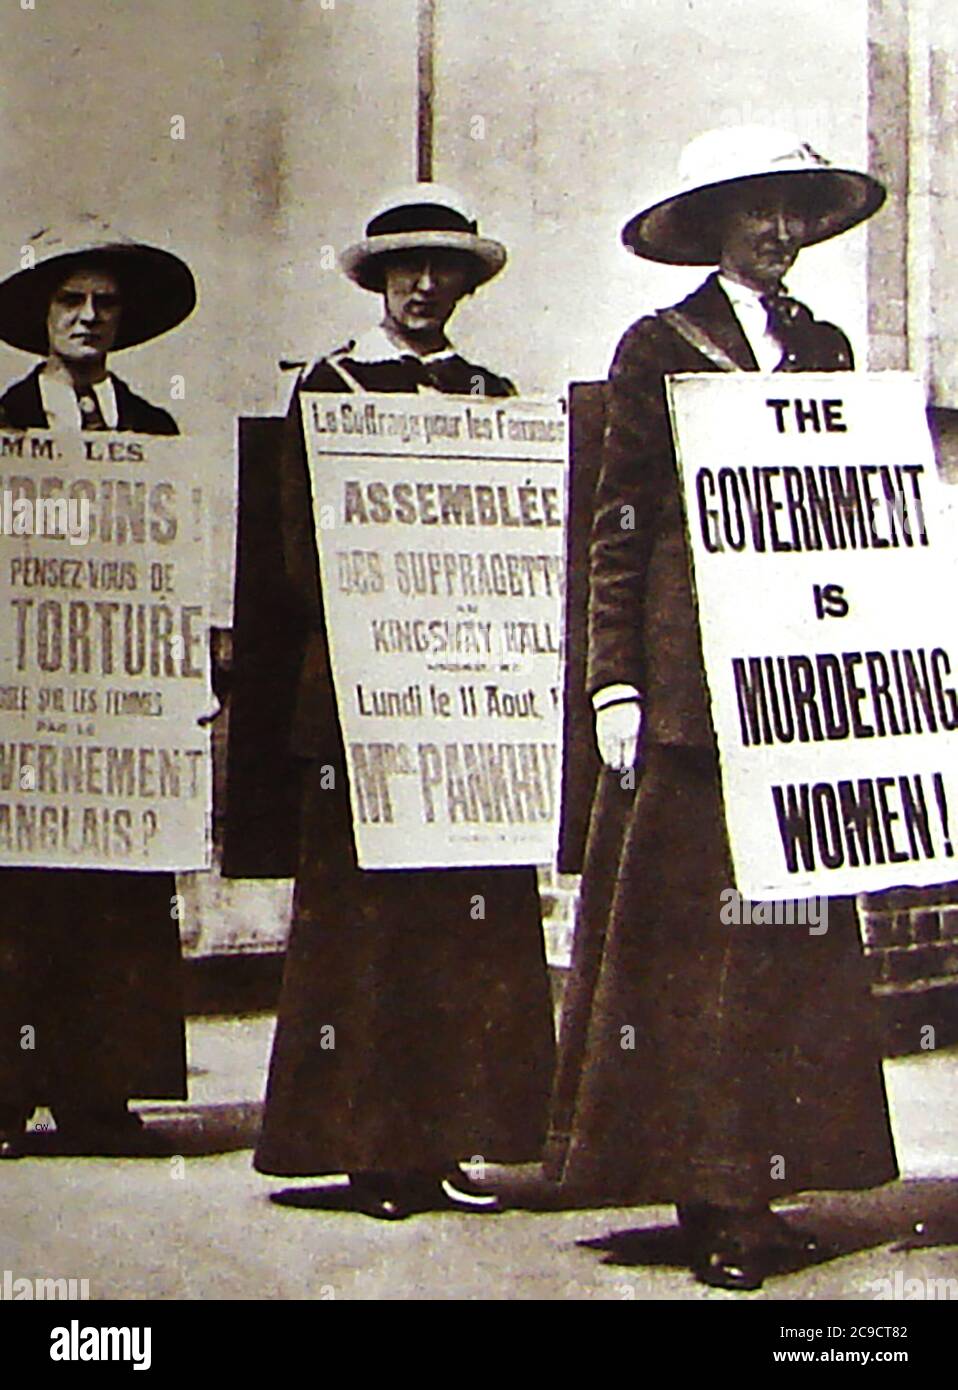 Three British militant suffragettes parading with  slogans on 'sandwich boards' in French and English such as 'The government is Murdering Women'. Stock Photo